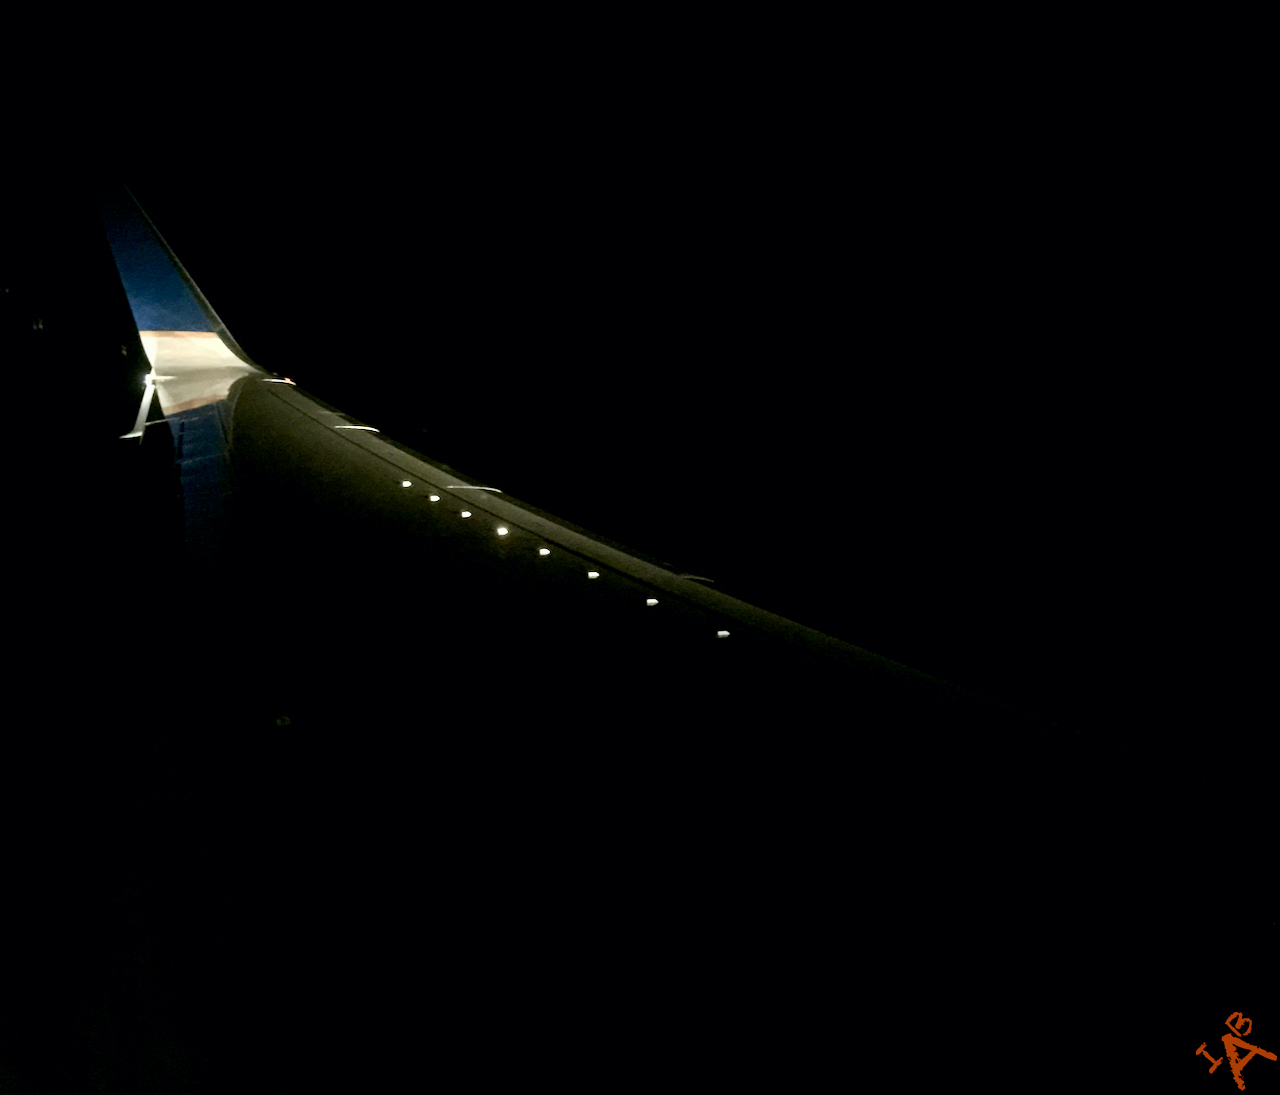 An airplane wing lit up at night.